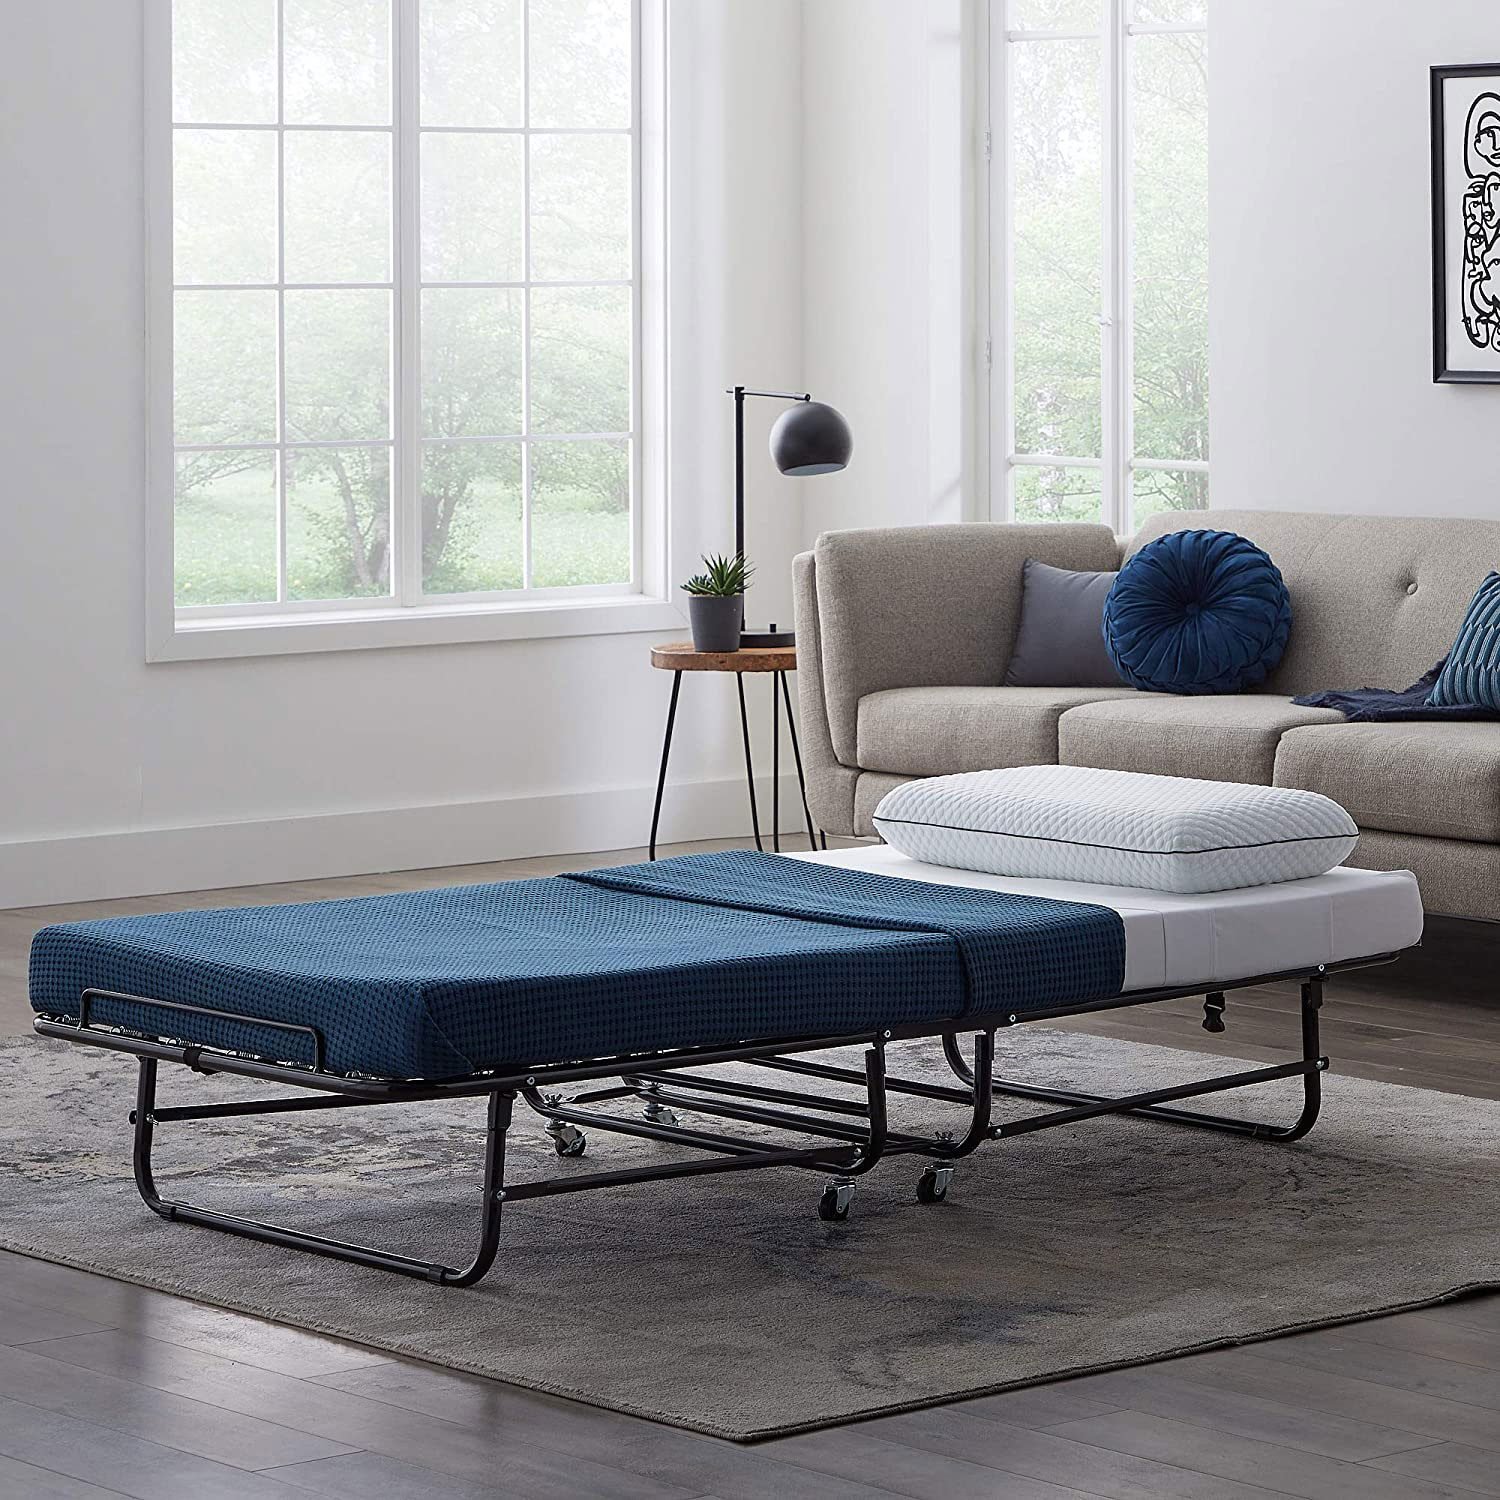 The Best Folding Beds for Small Spaces